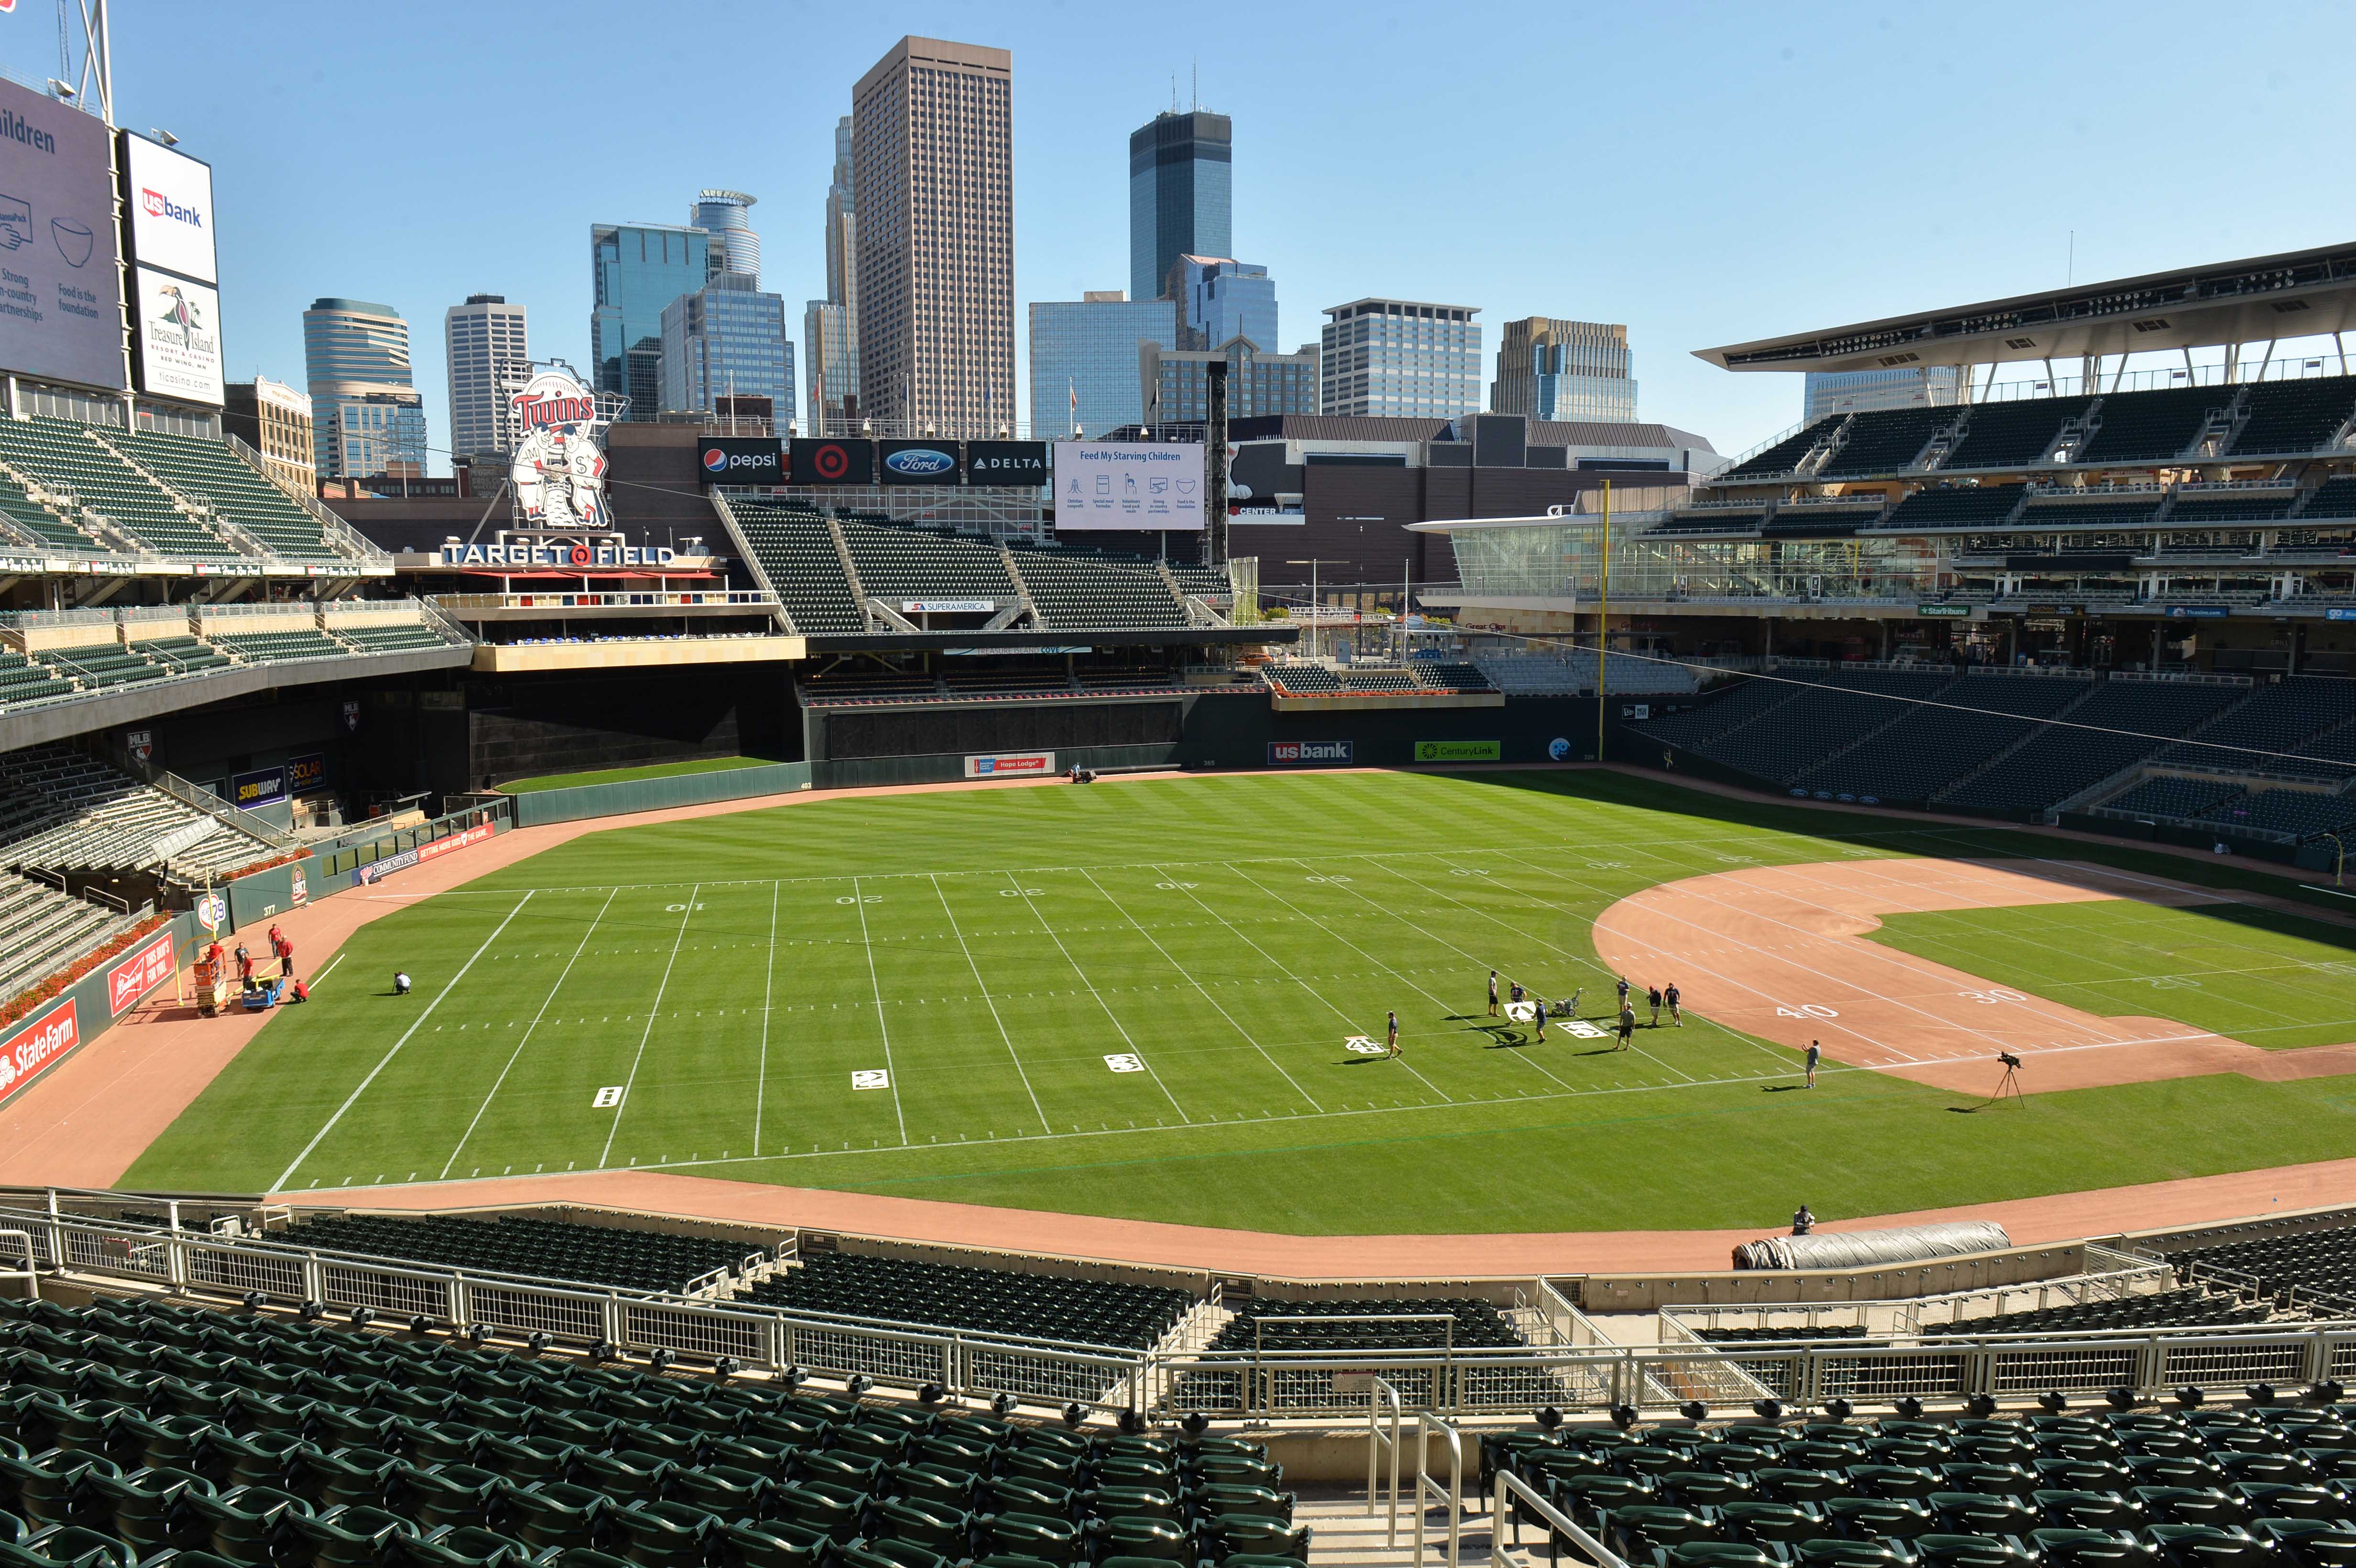 Here's how Target Field was morphed into a football stadium